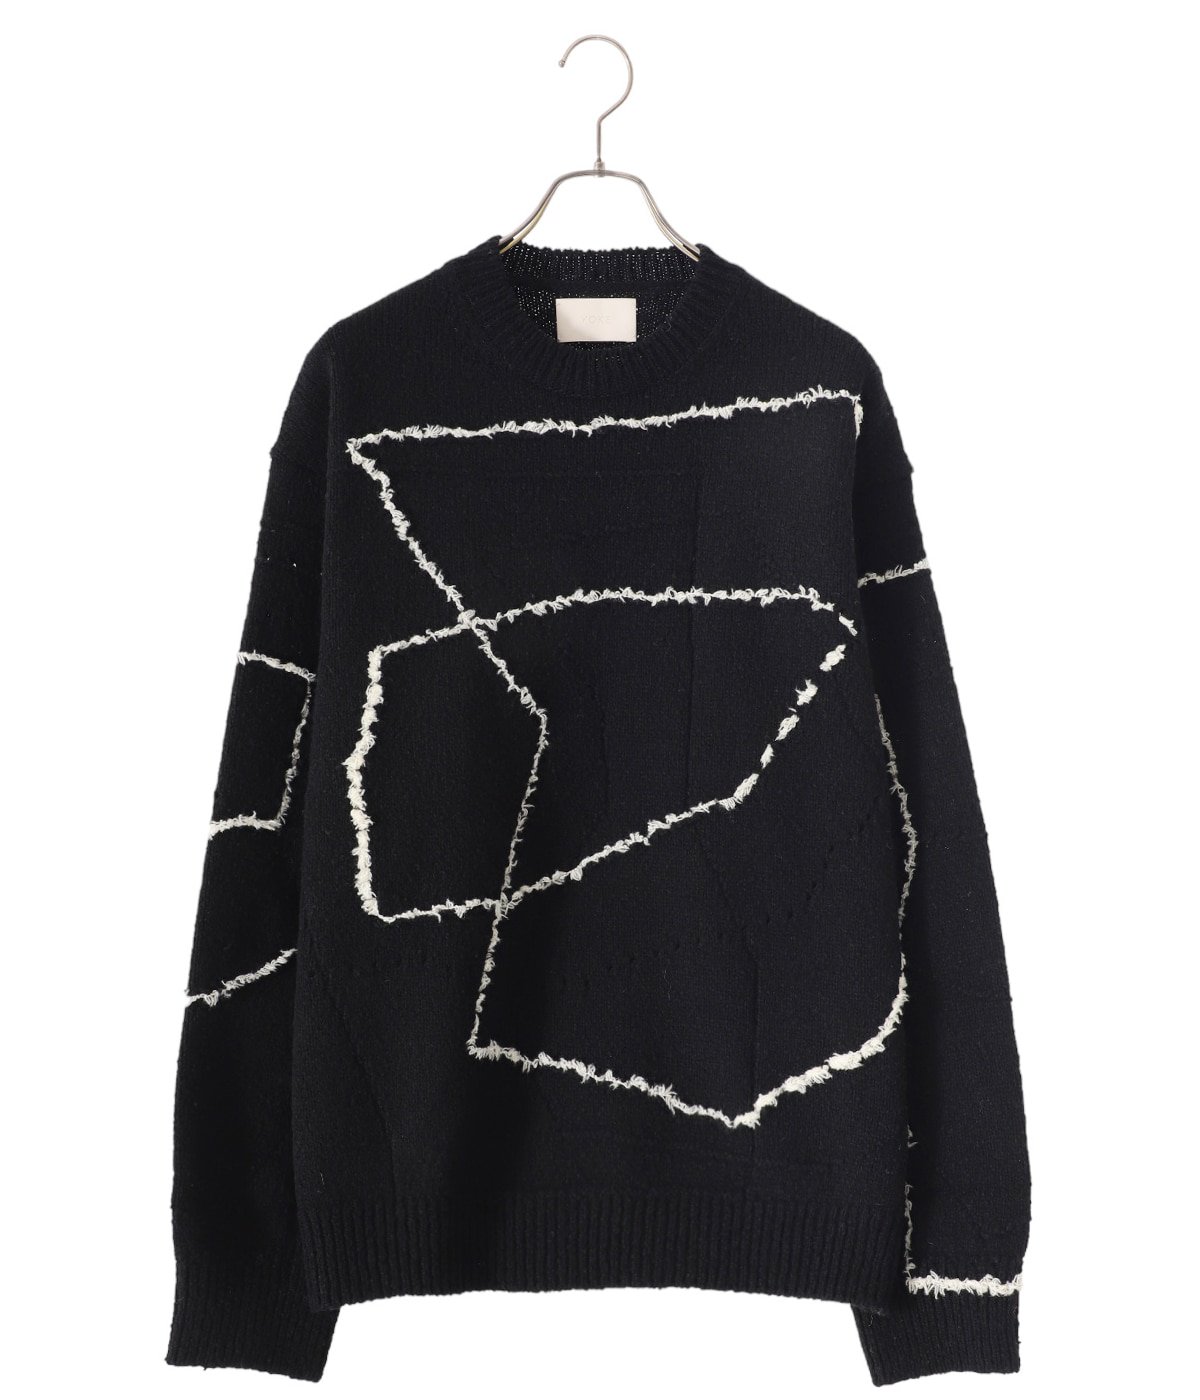 CONTINUOUS LINE EMBROIDERY SWEATER | YOKE(ヨーク) / トップス 